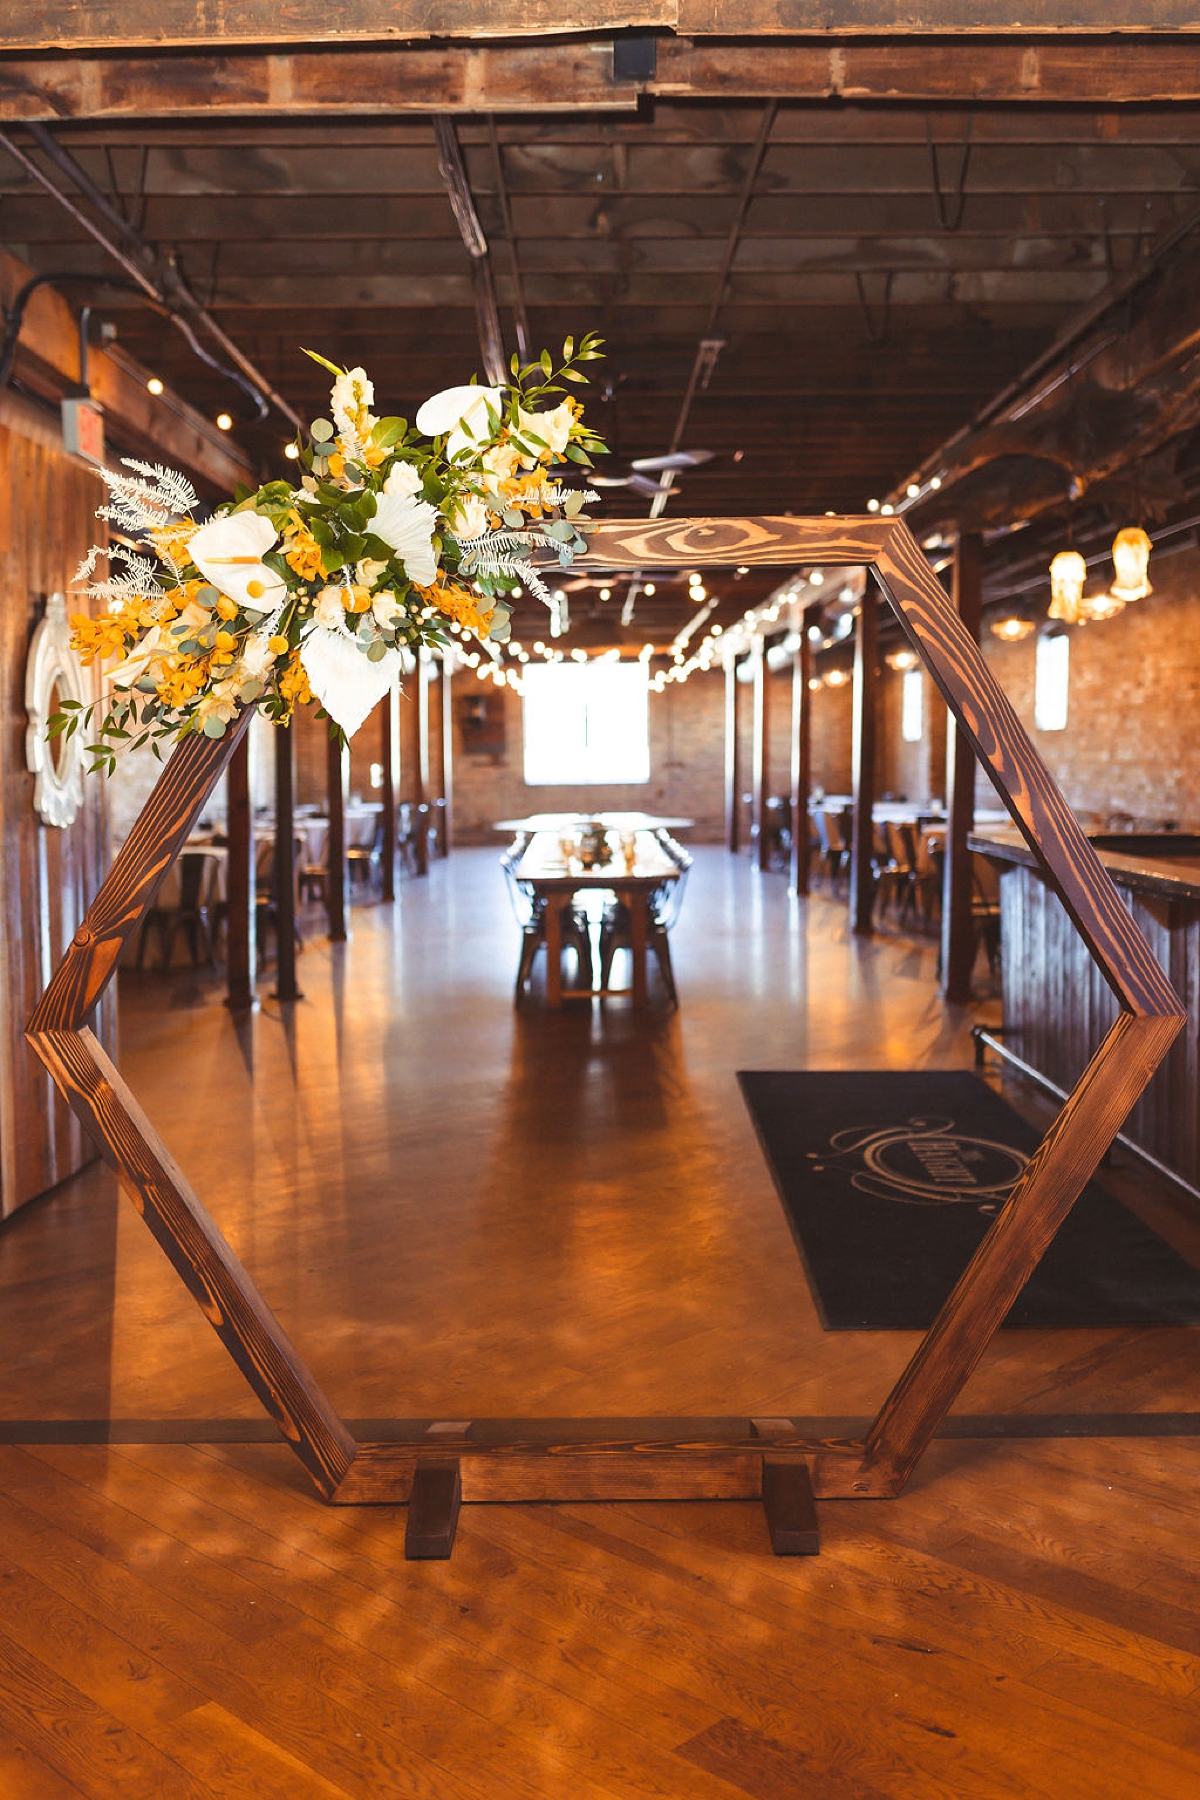 Hexagon arch with yellow and white flowers at loft wedding venue Chicago